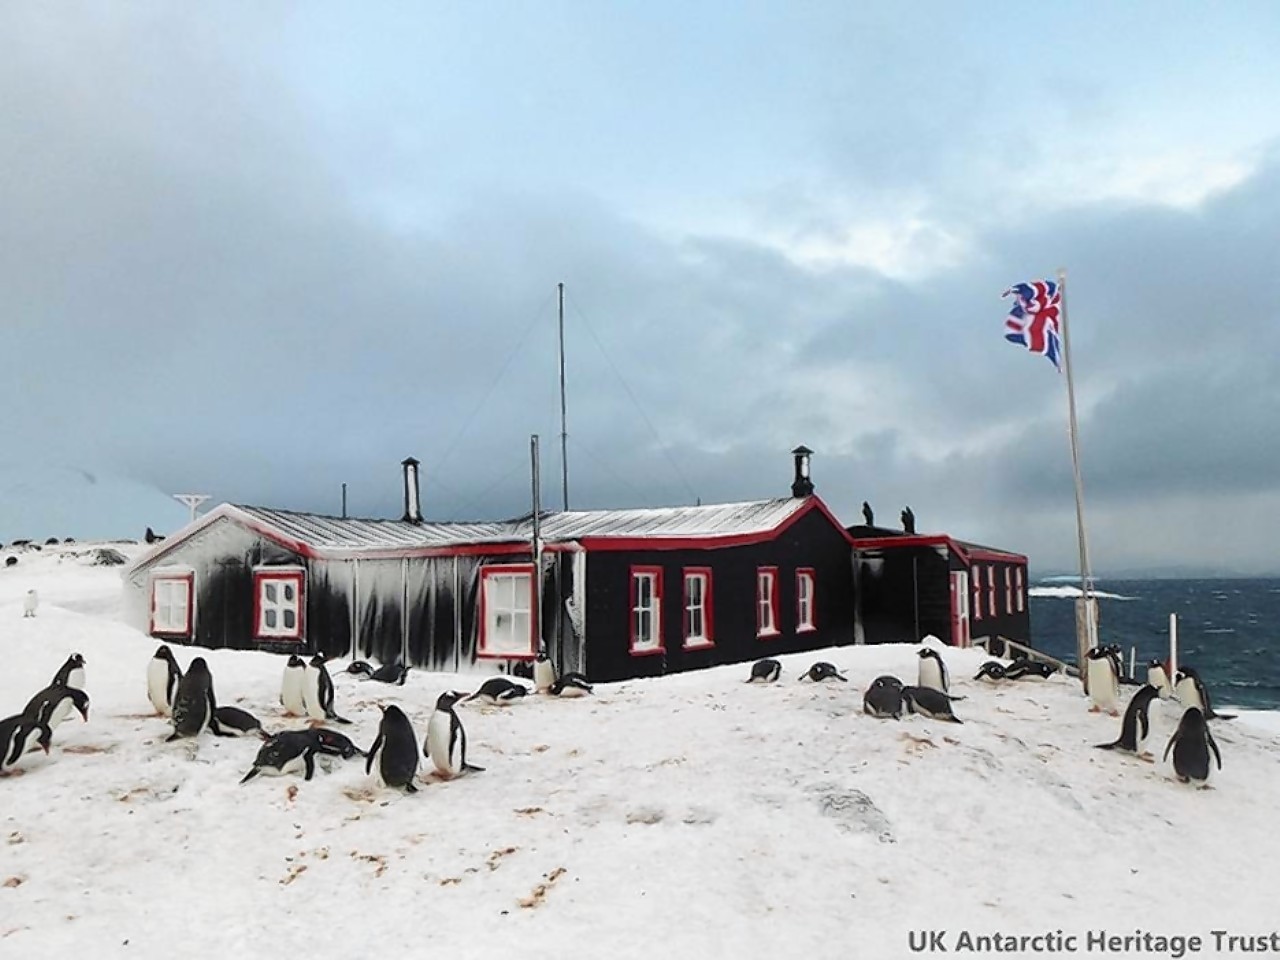 She will be responsible for the world's most southerly post office in Antarctica